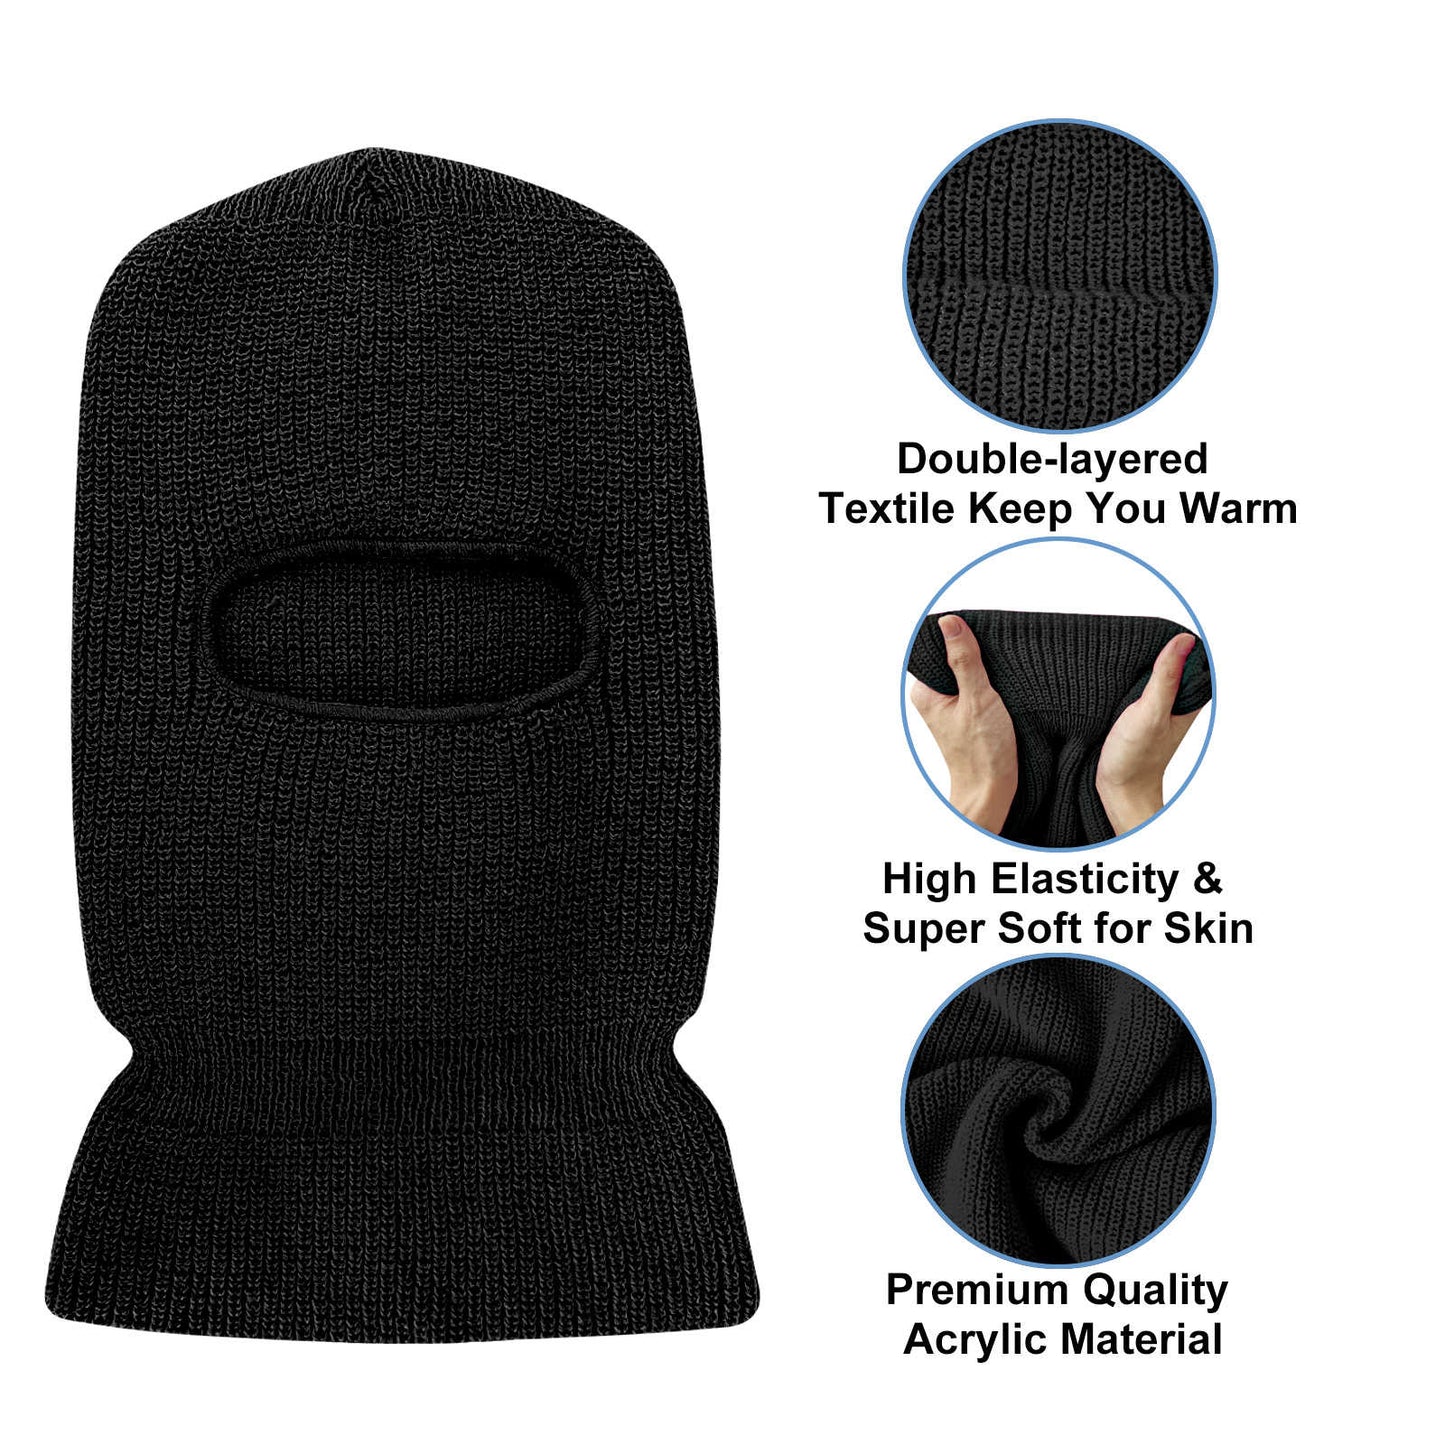 EvridWear 1 Pack Balaclava Face Mask, Thermal Winter Ski Mask for Cold Weather, Men Women (Black)